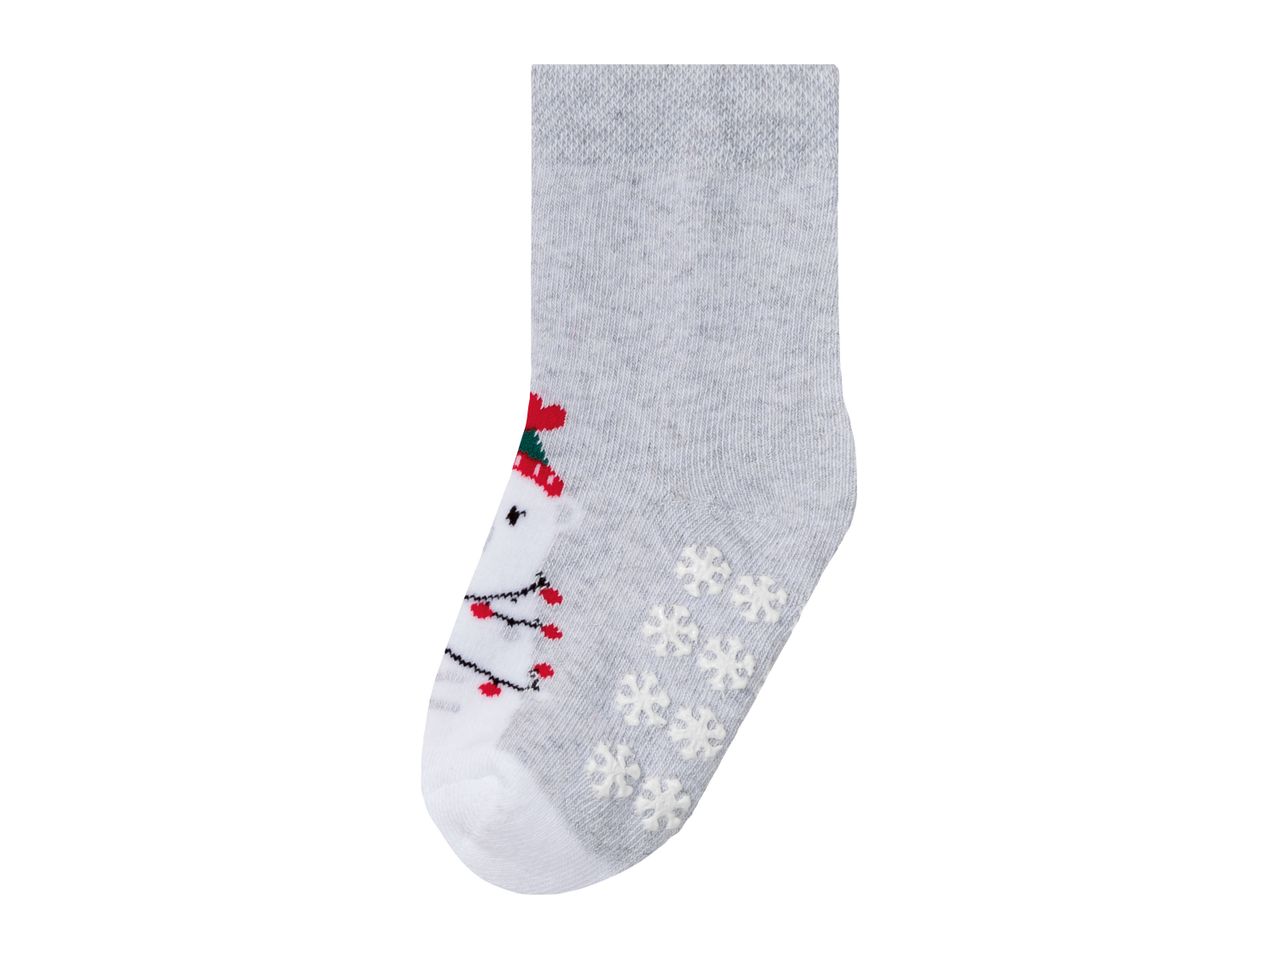 Go to full screen view: Lupilu Younger Kids’ Christmas Thermal Socks - 2 pairs - Image 9